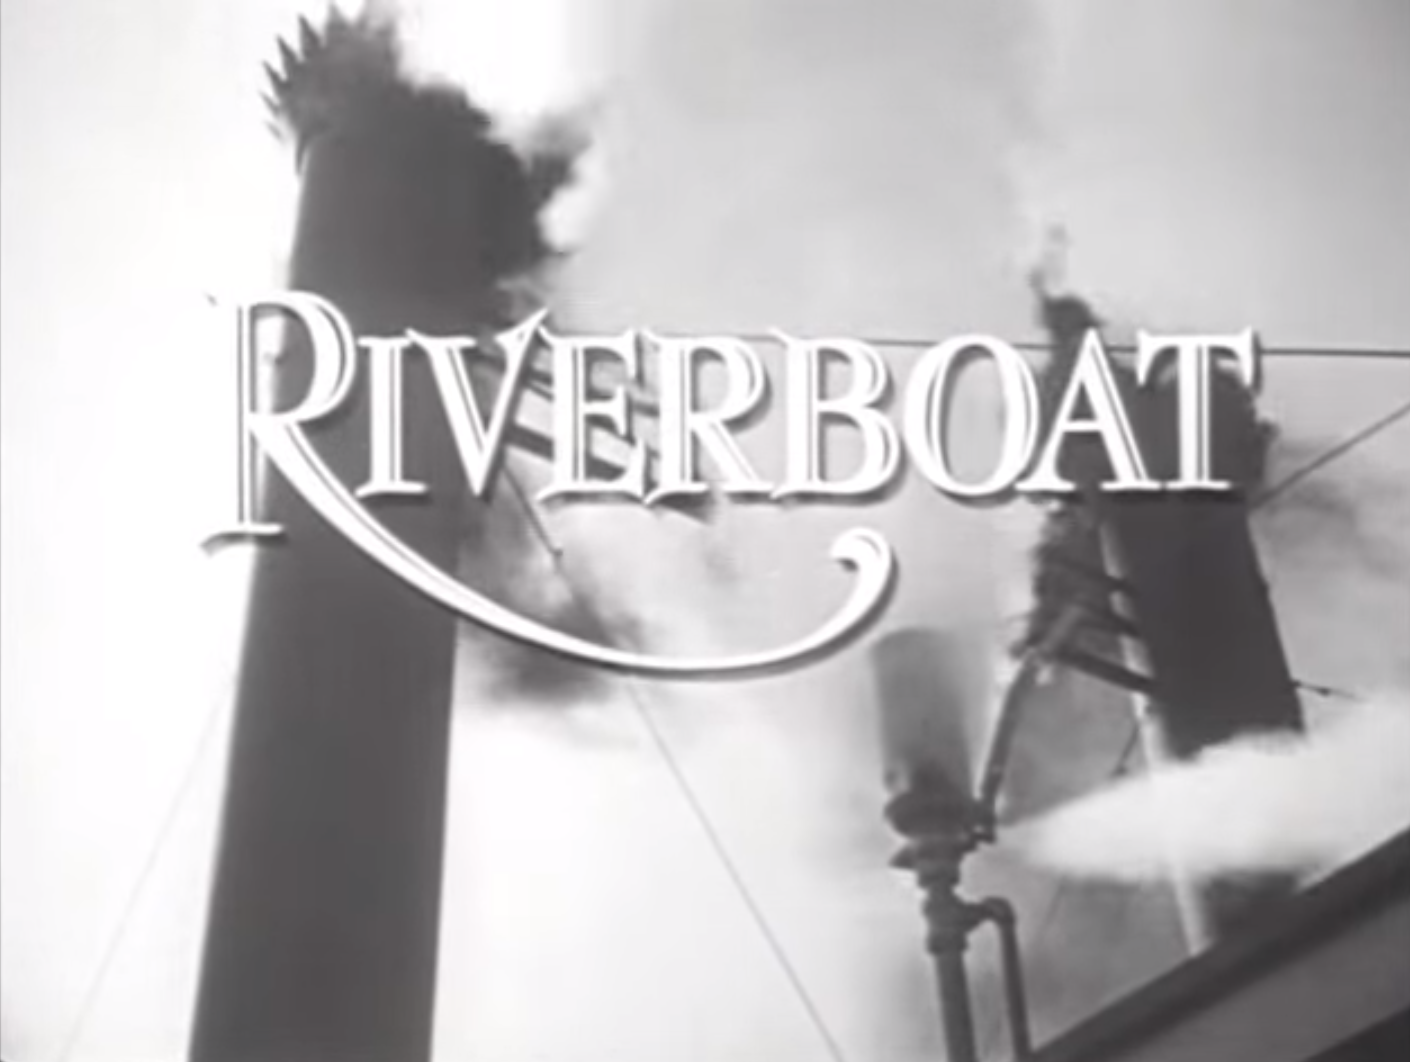 riverboat tv show theme song